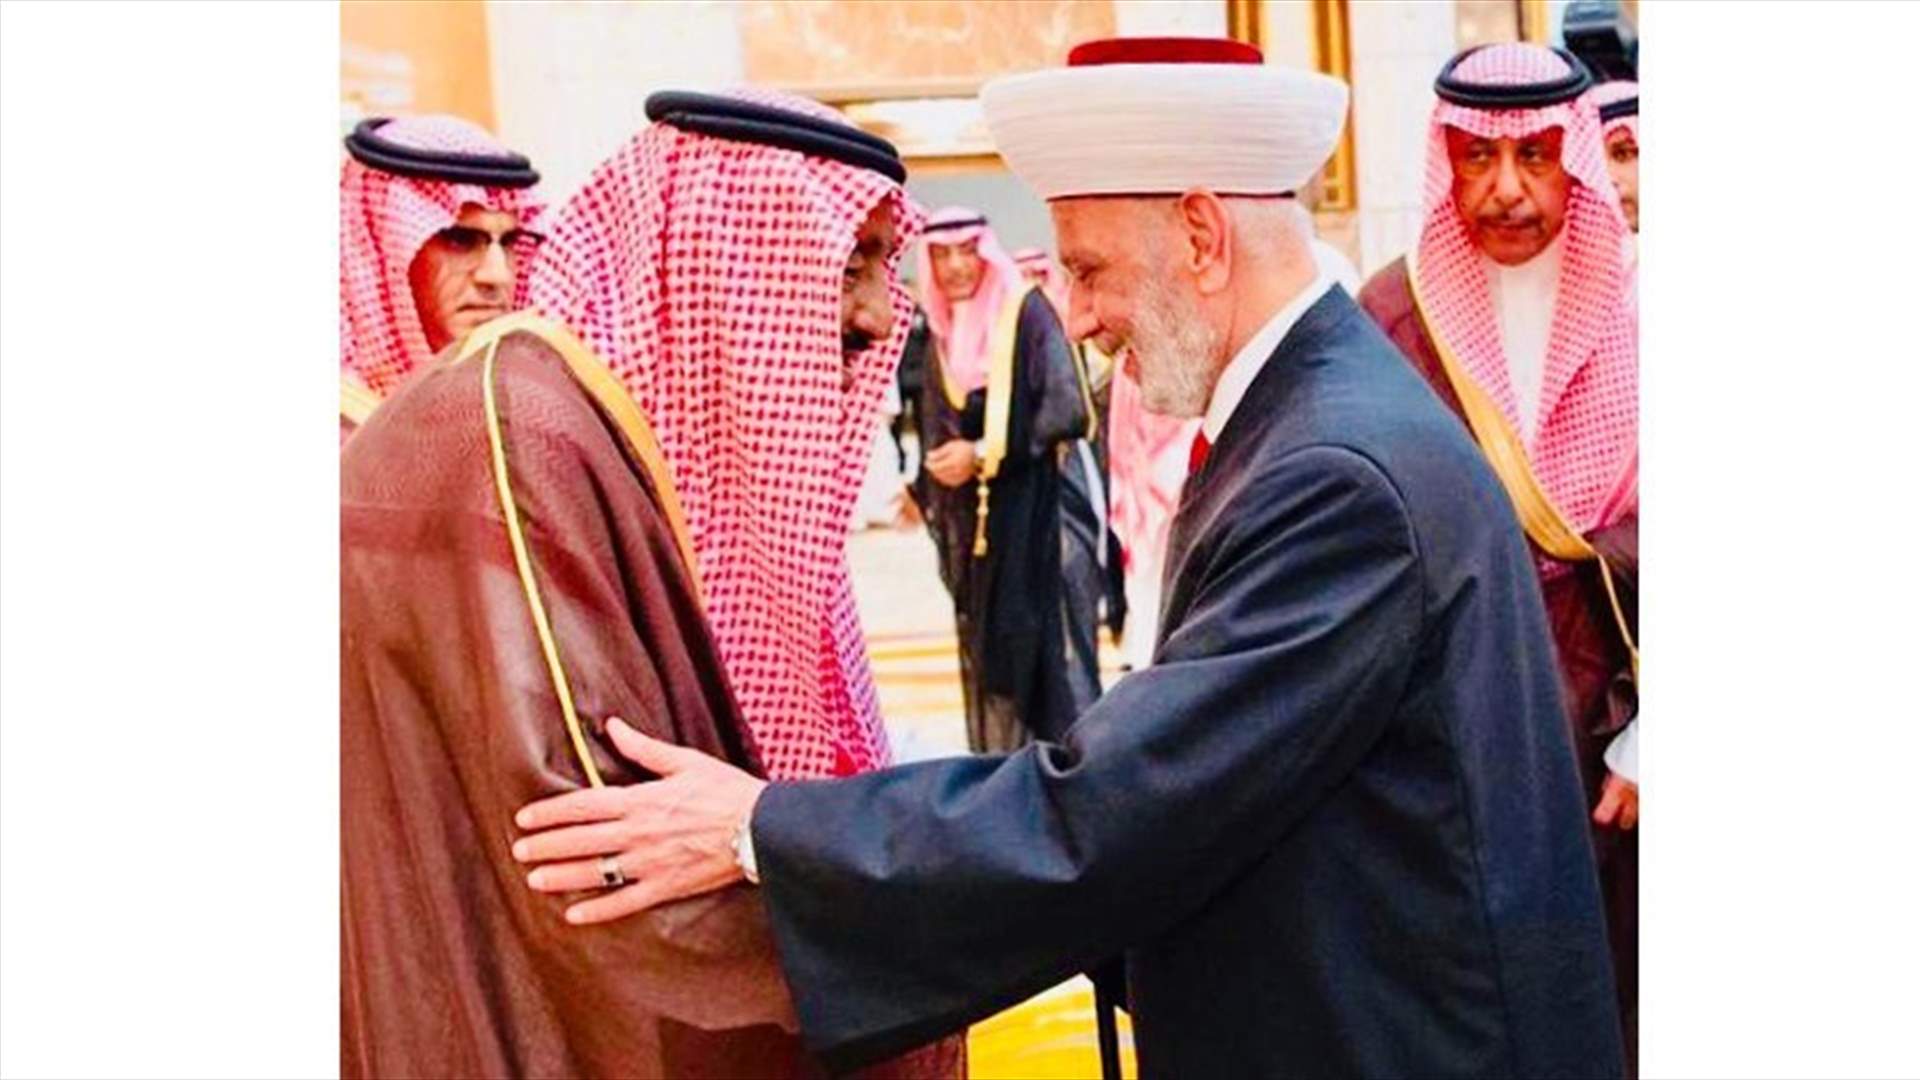 Mufti Darian meets with King Salman, says Lebanon witnessing political and economic breakthrough